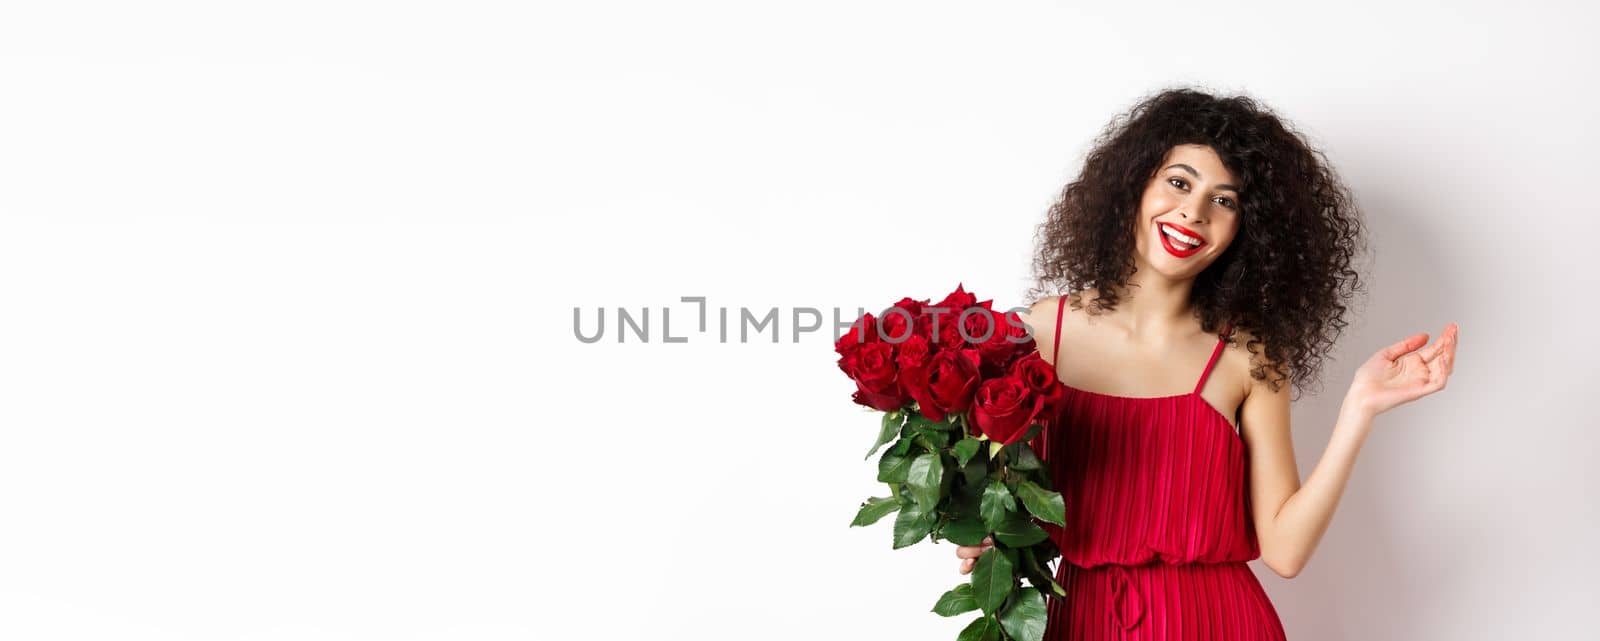 Happy woman celebrating, wearing stylish dress and holding flowers, smiling at camera, white background by Benzoix